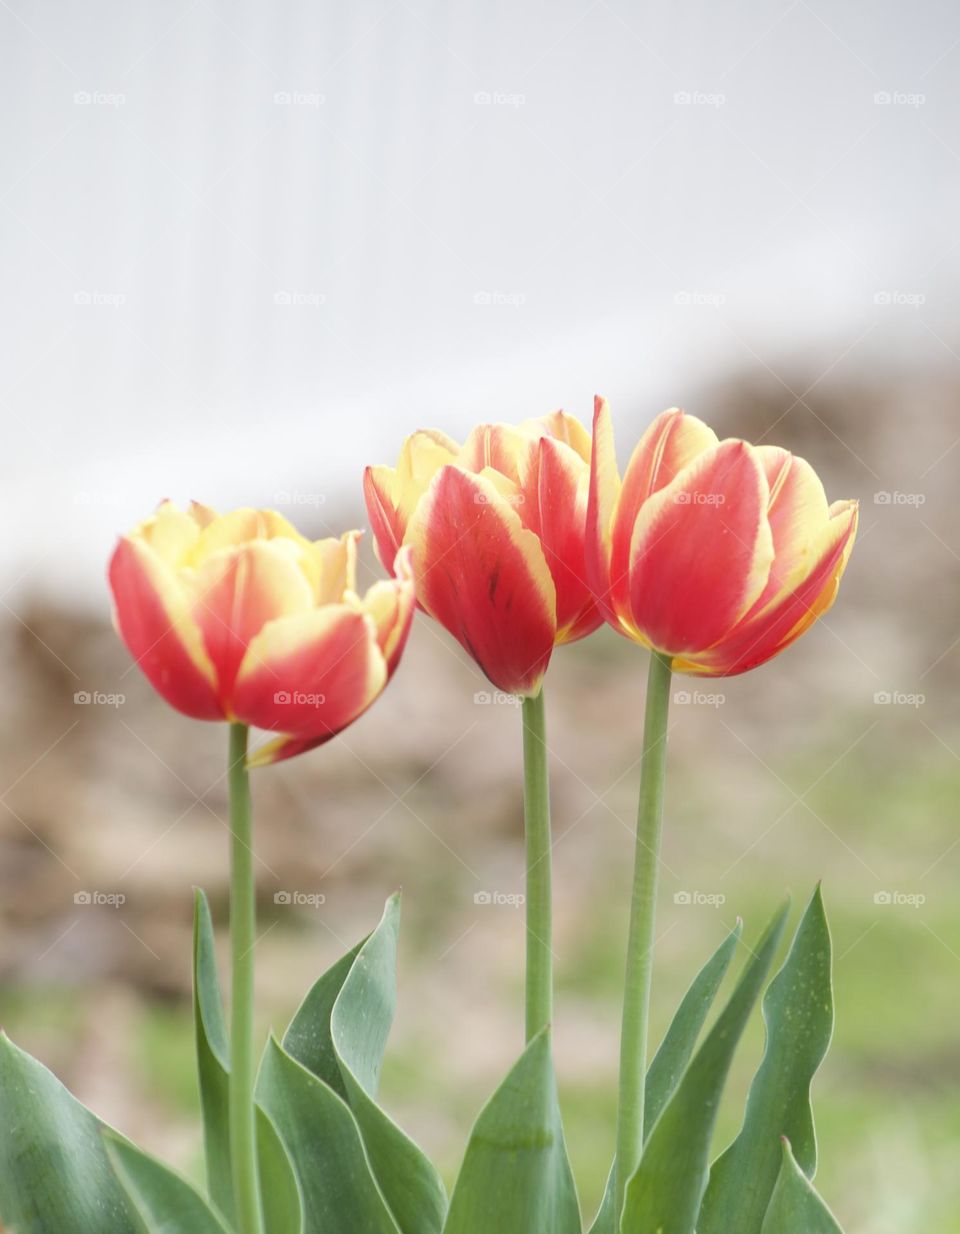 Three Red-Yellow Tulips blooming for Spring 